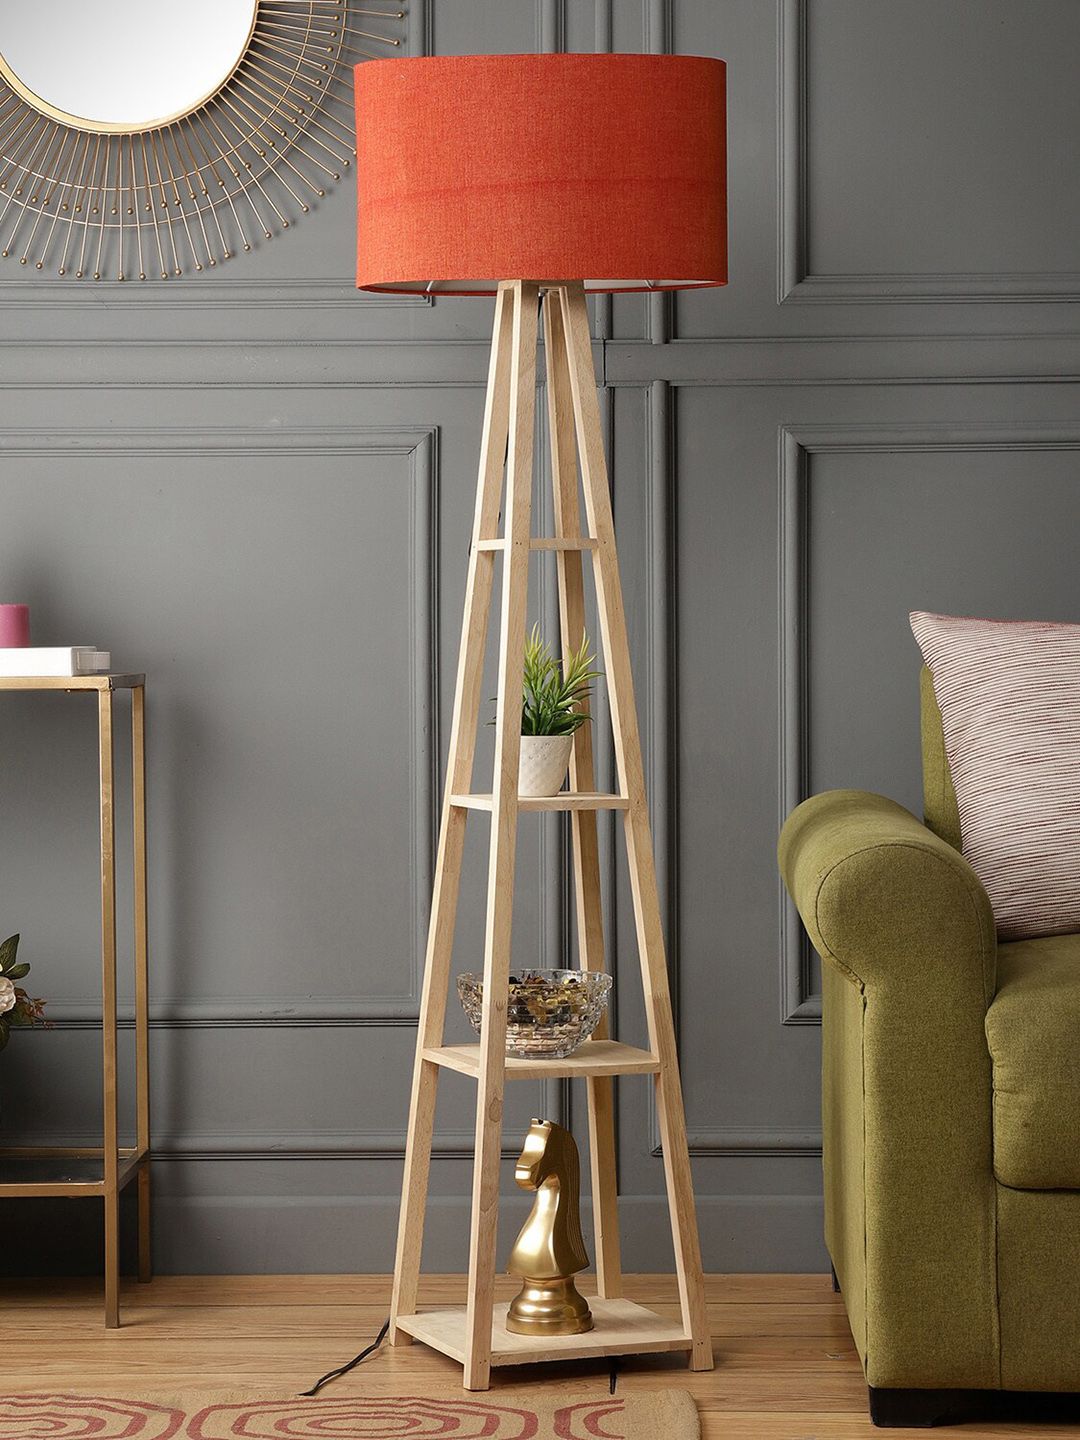 SANDED EDGE Beige & Red 3-Tier Wooden Floor Lamp With Shade Price in India